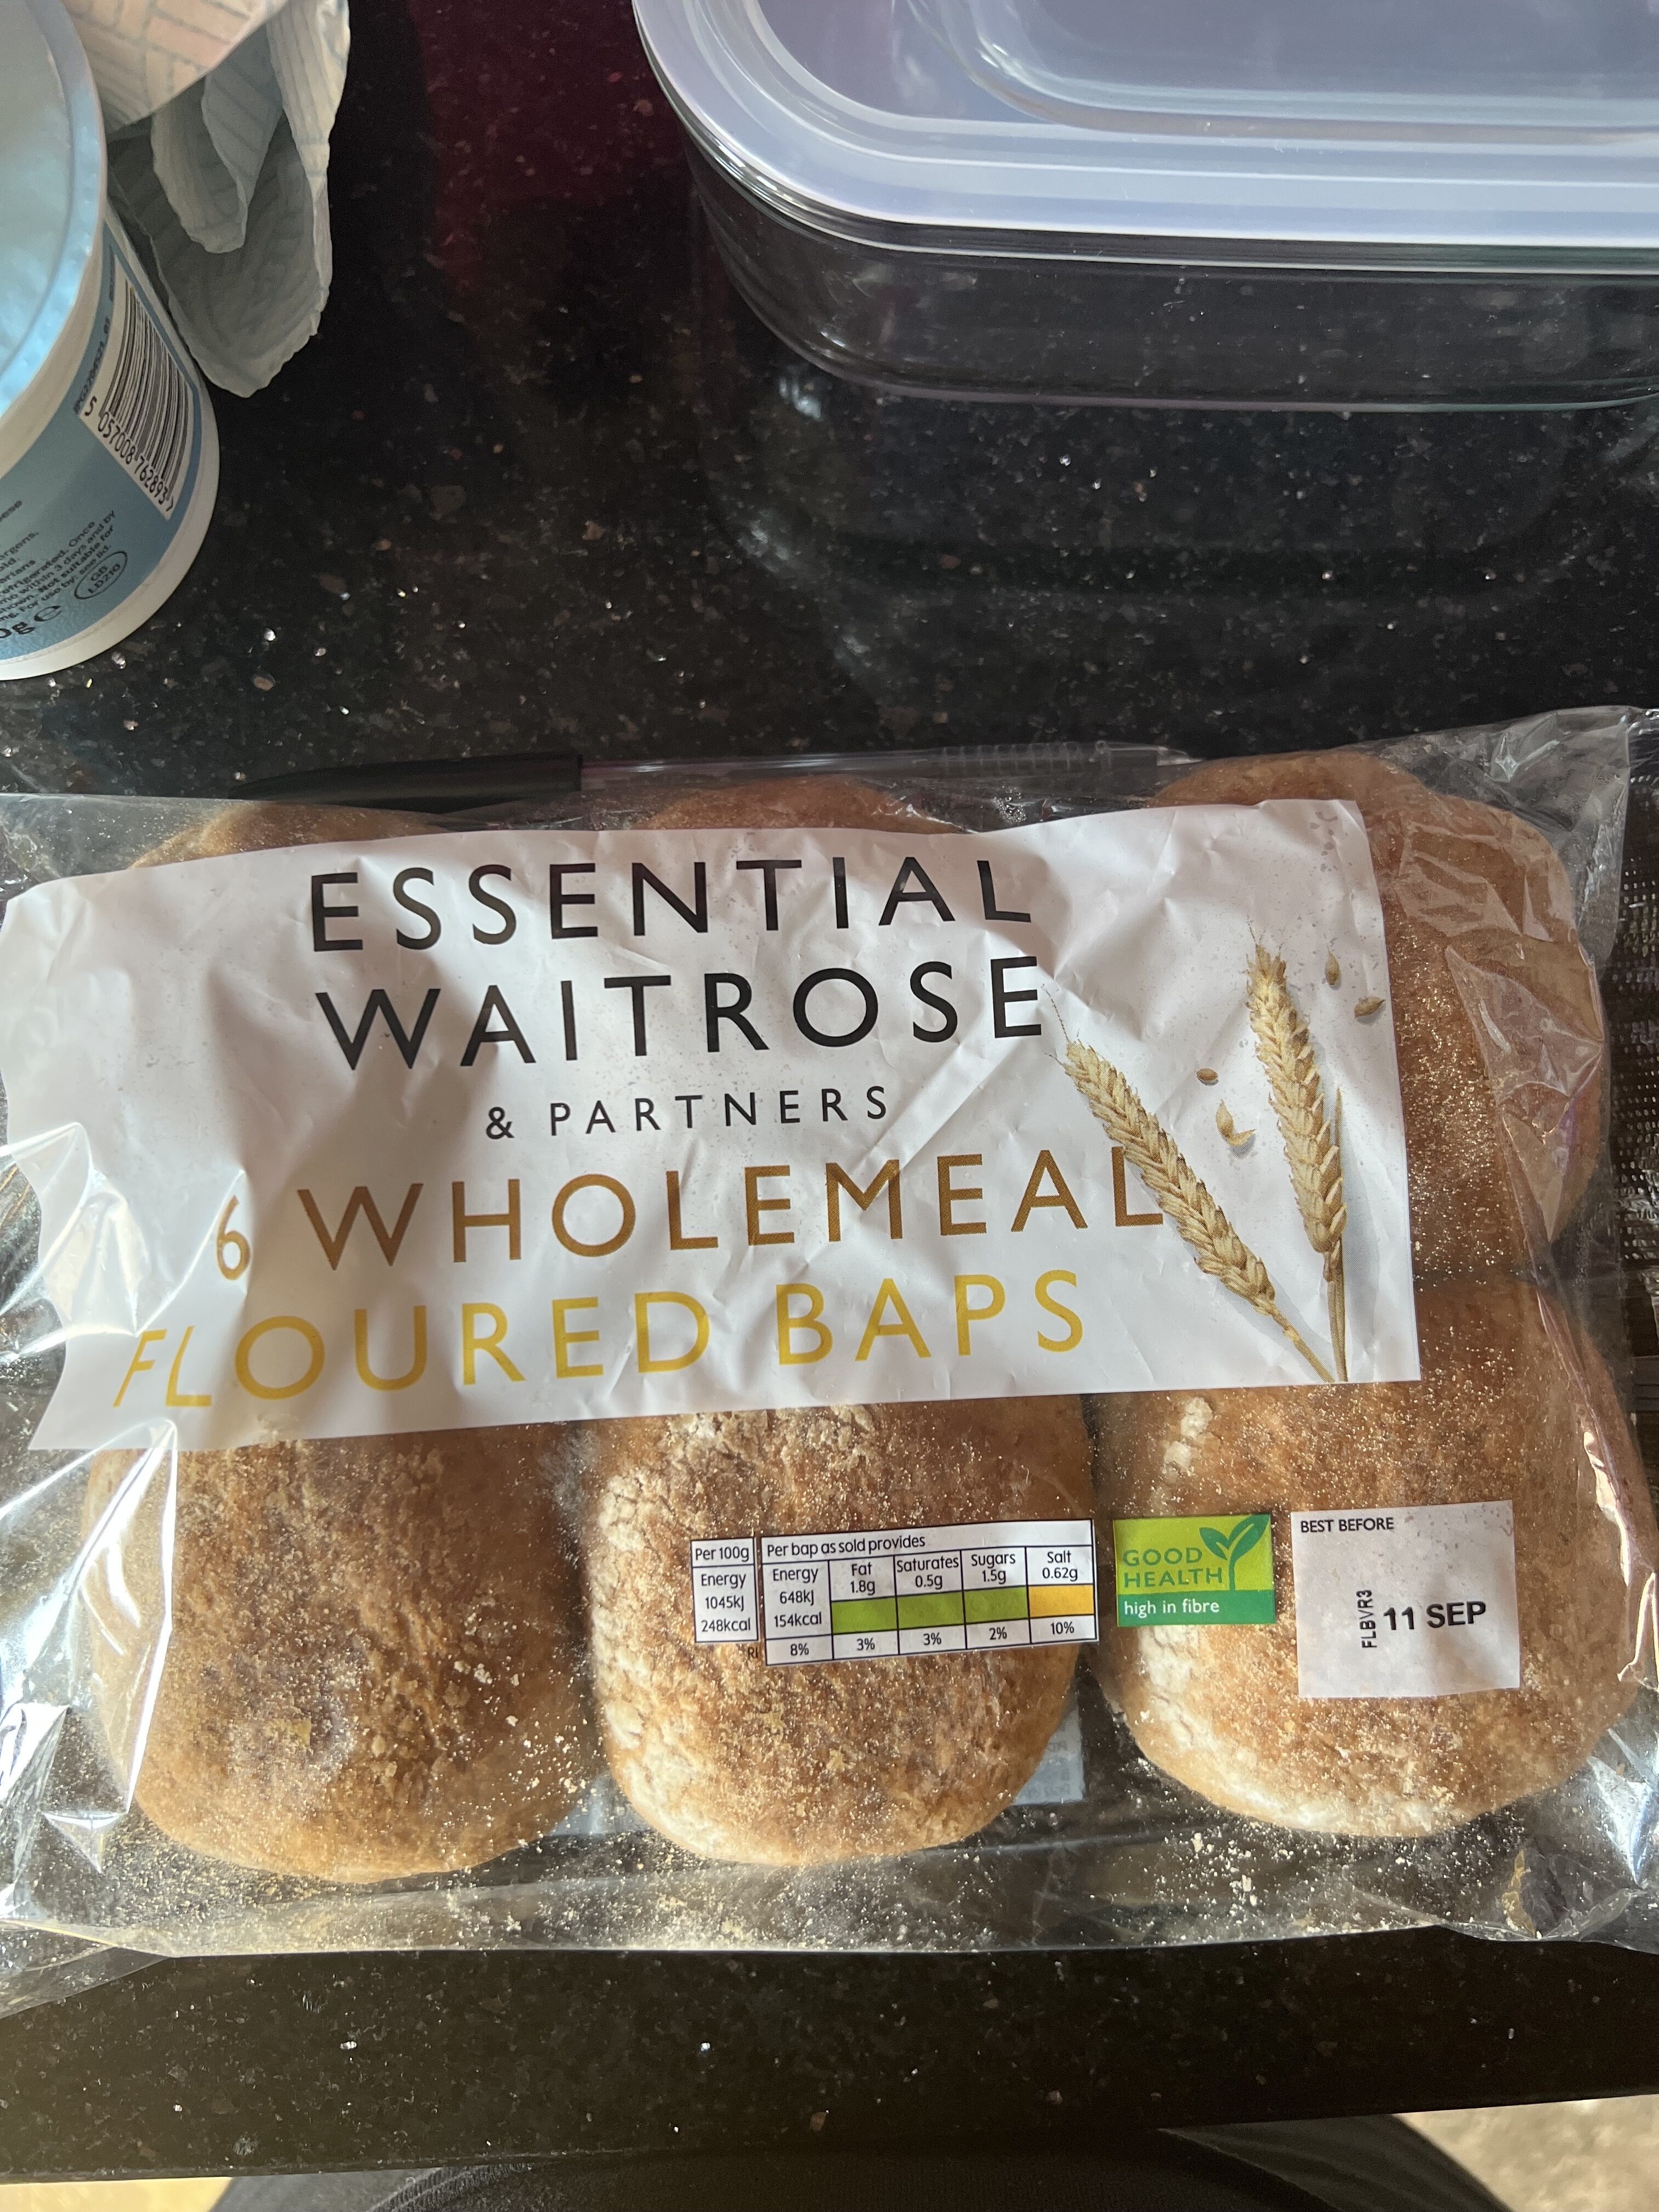 6 Wholemeal Floured Baps - Recycling instructions and/or packaging information